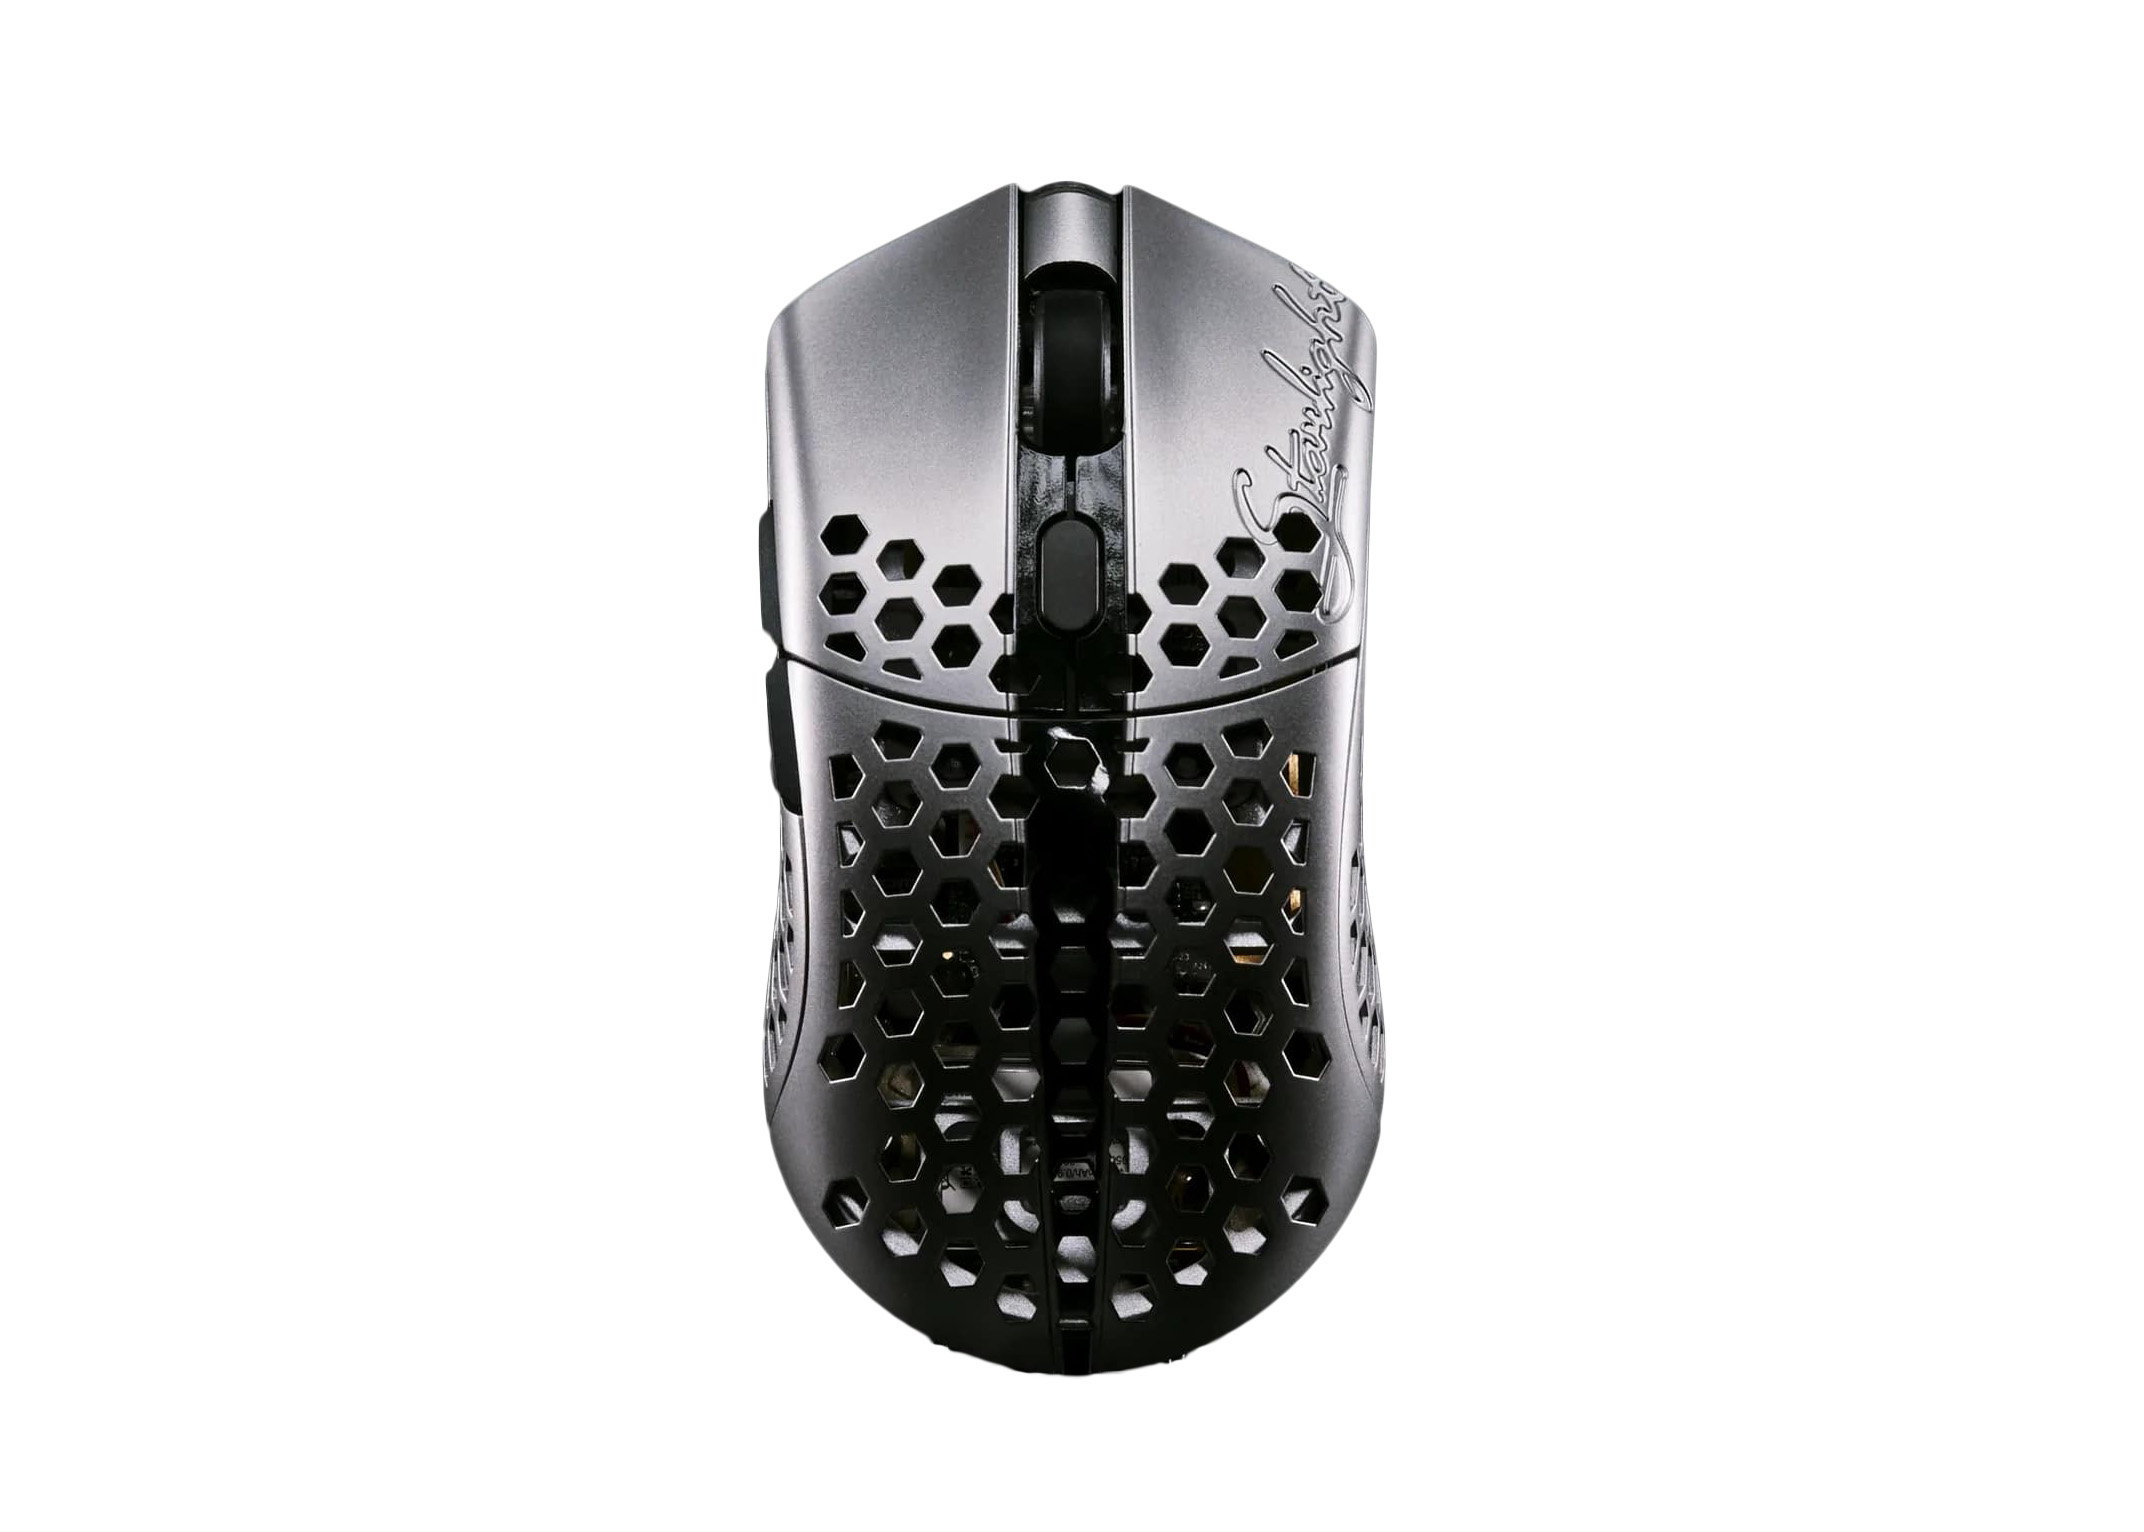 Finalmouse Starlight Pro TenZ Wireless Mouse Small